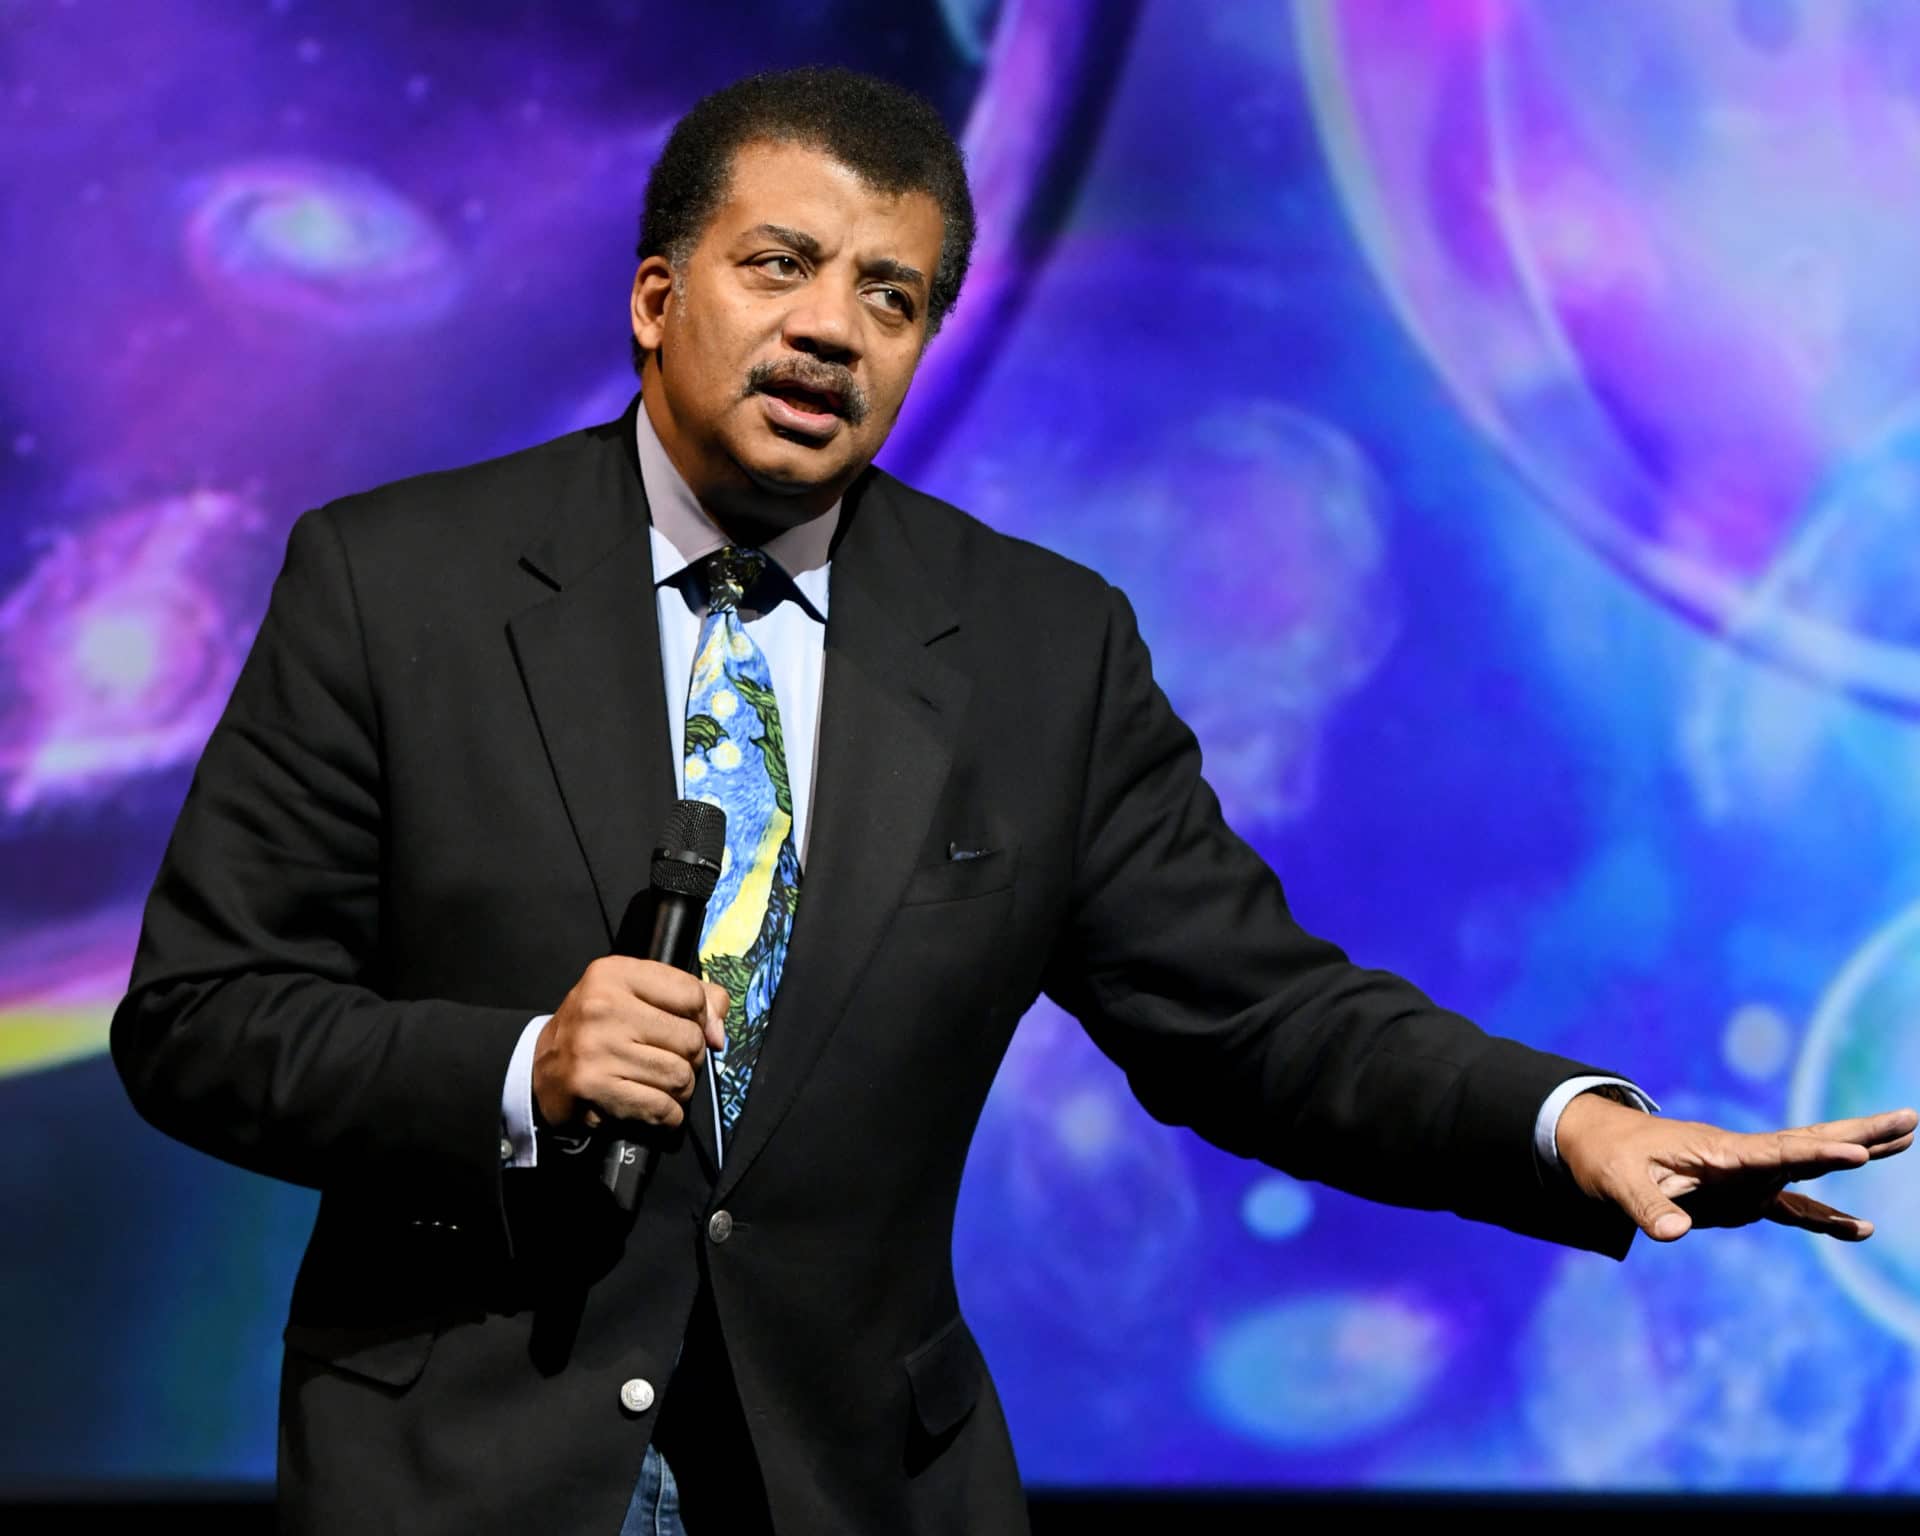 Neil DeGrasse Tyson’s NatGeo Show Suspended Amid Sexual Misconduct Investigation